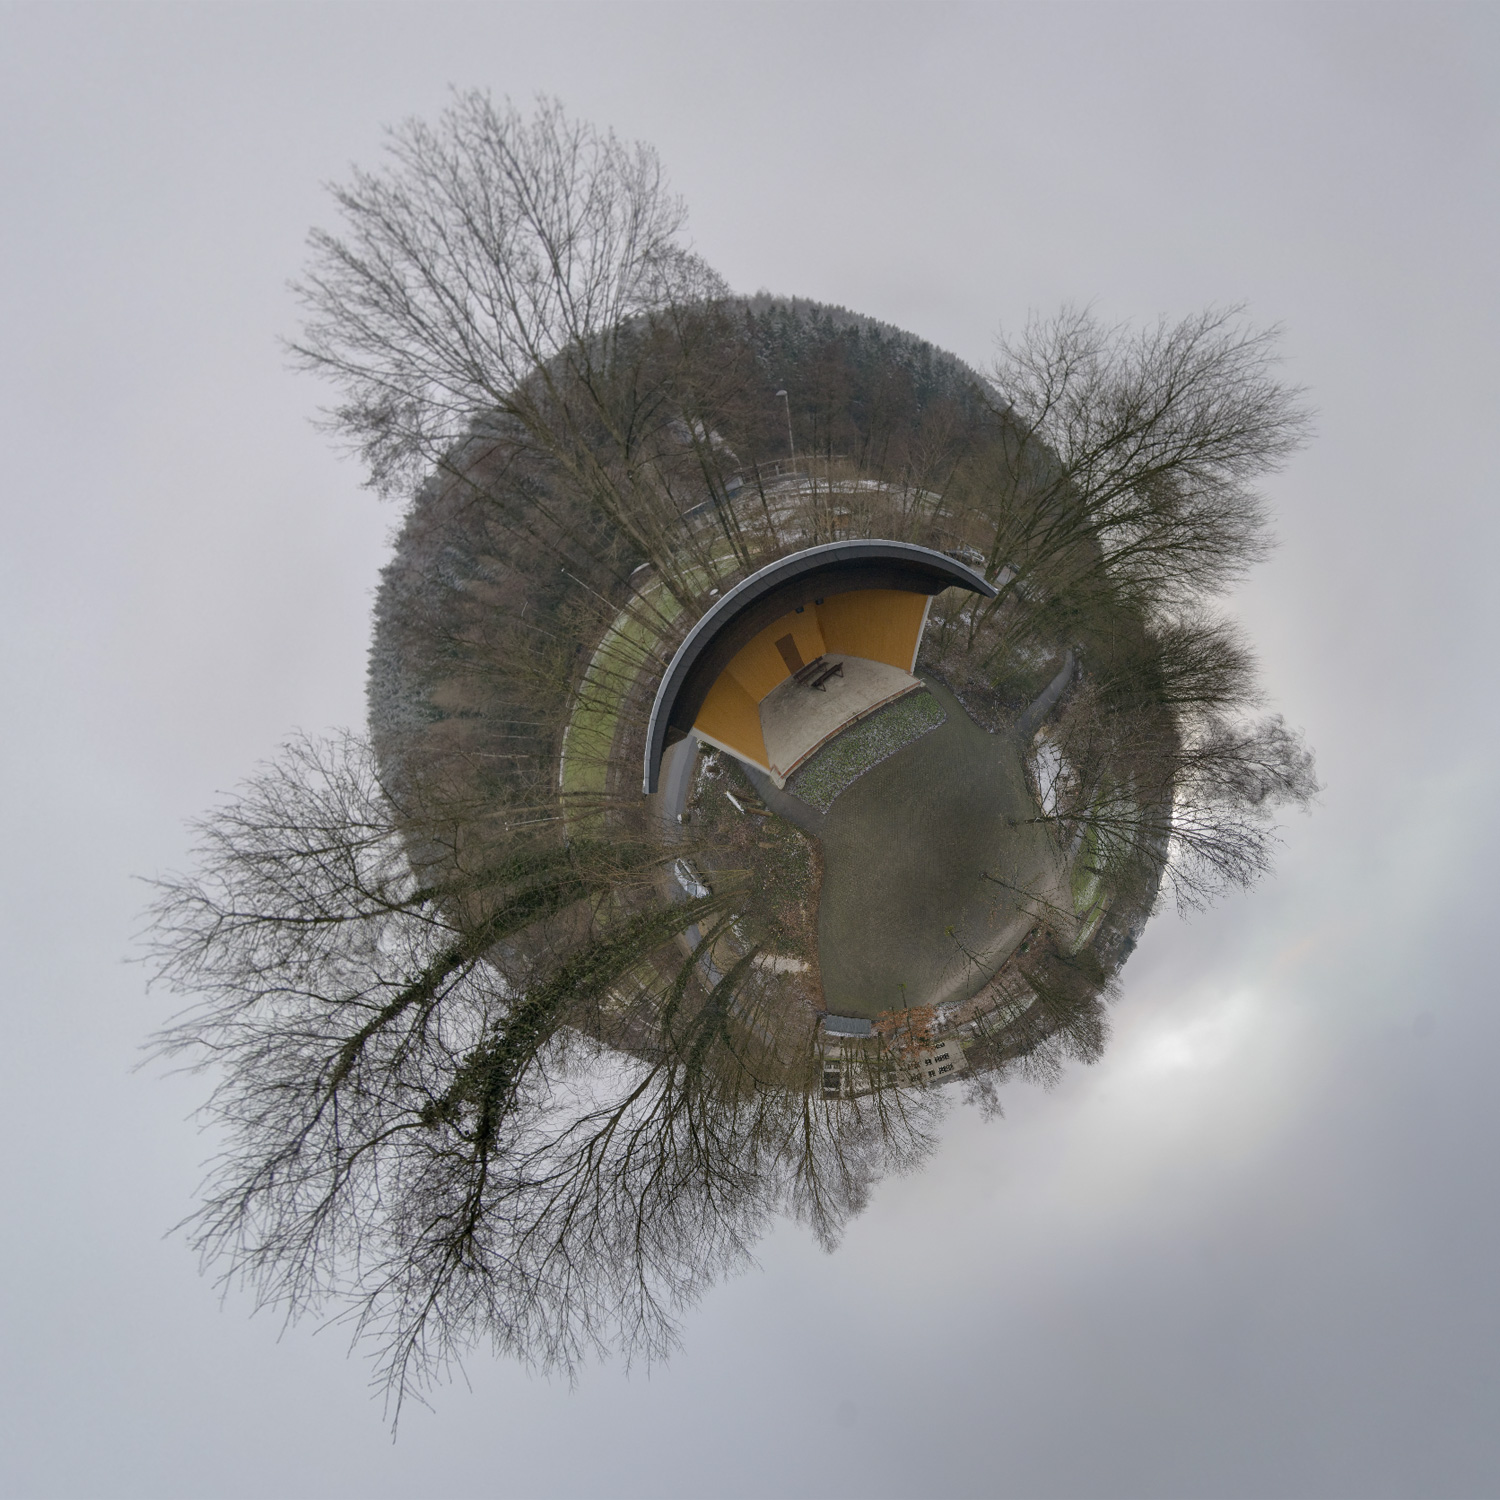 Panorama 062 - Little Planet